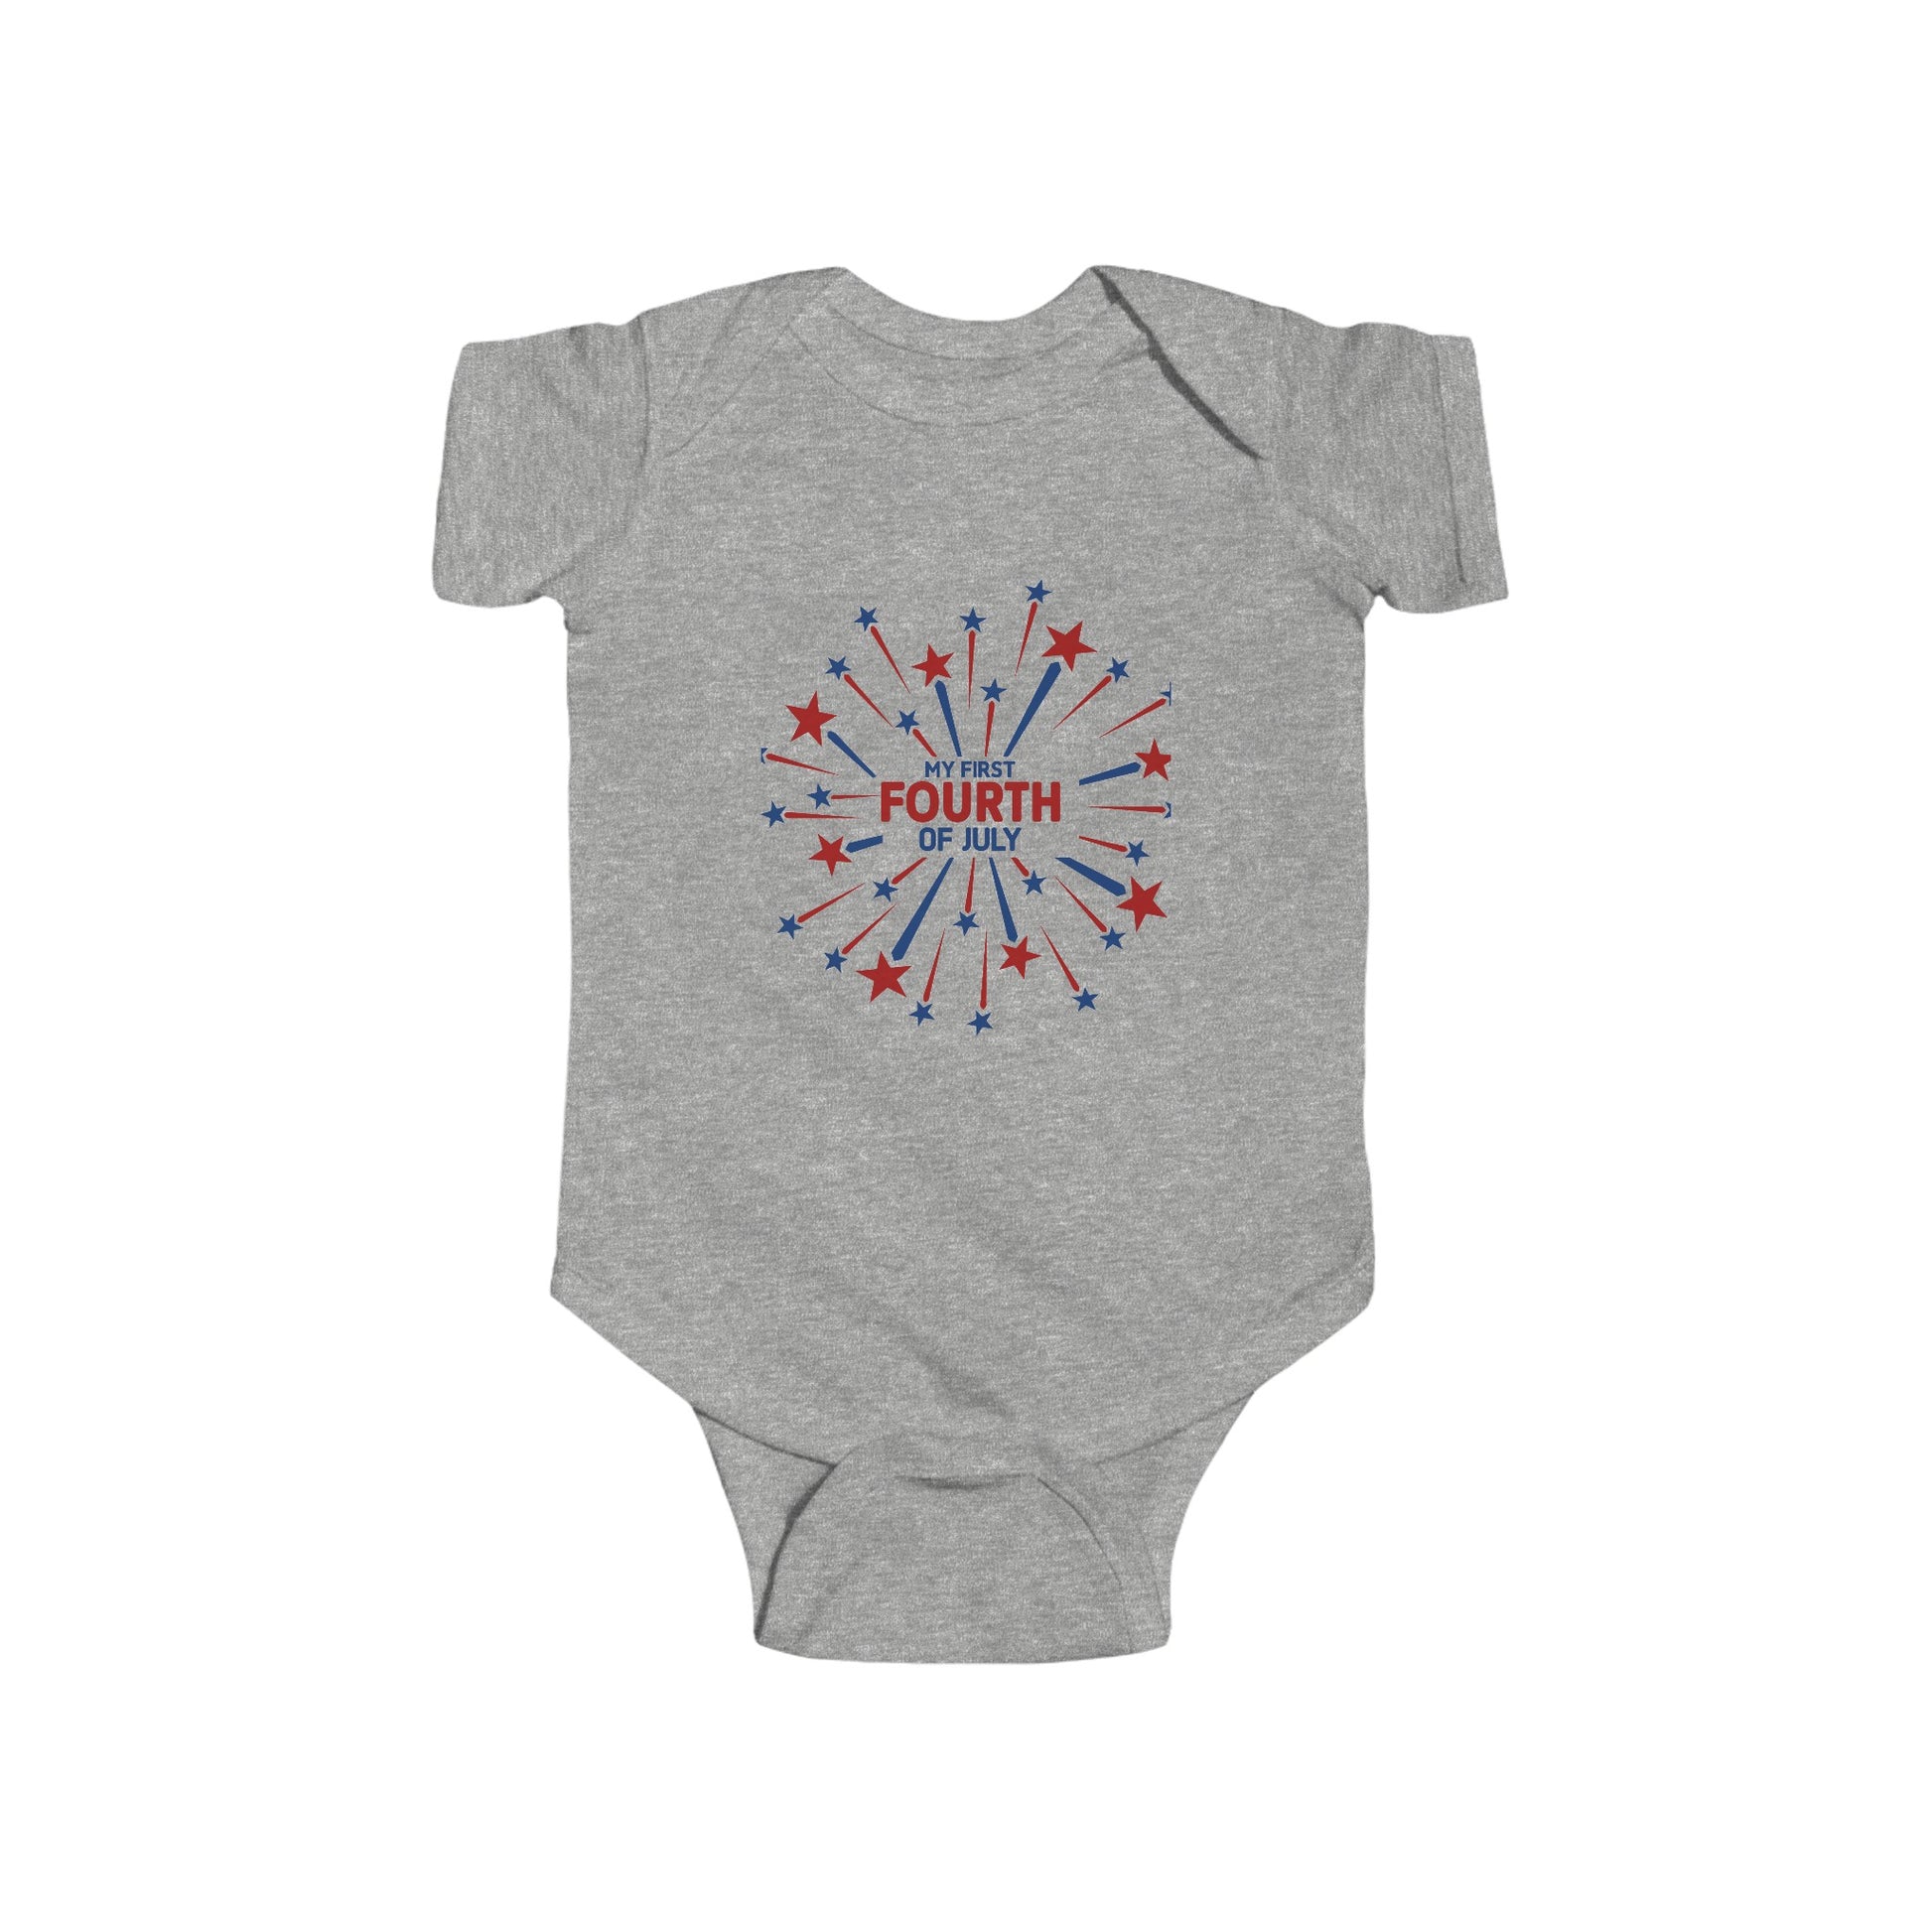 Get trendy with First Fourth Of July Onsie - Kids clothes available at Good Gift Company. Grab yours for $13.50 today!